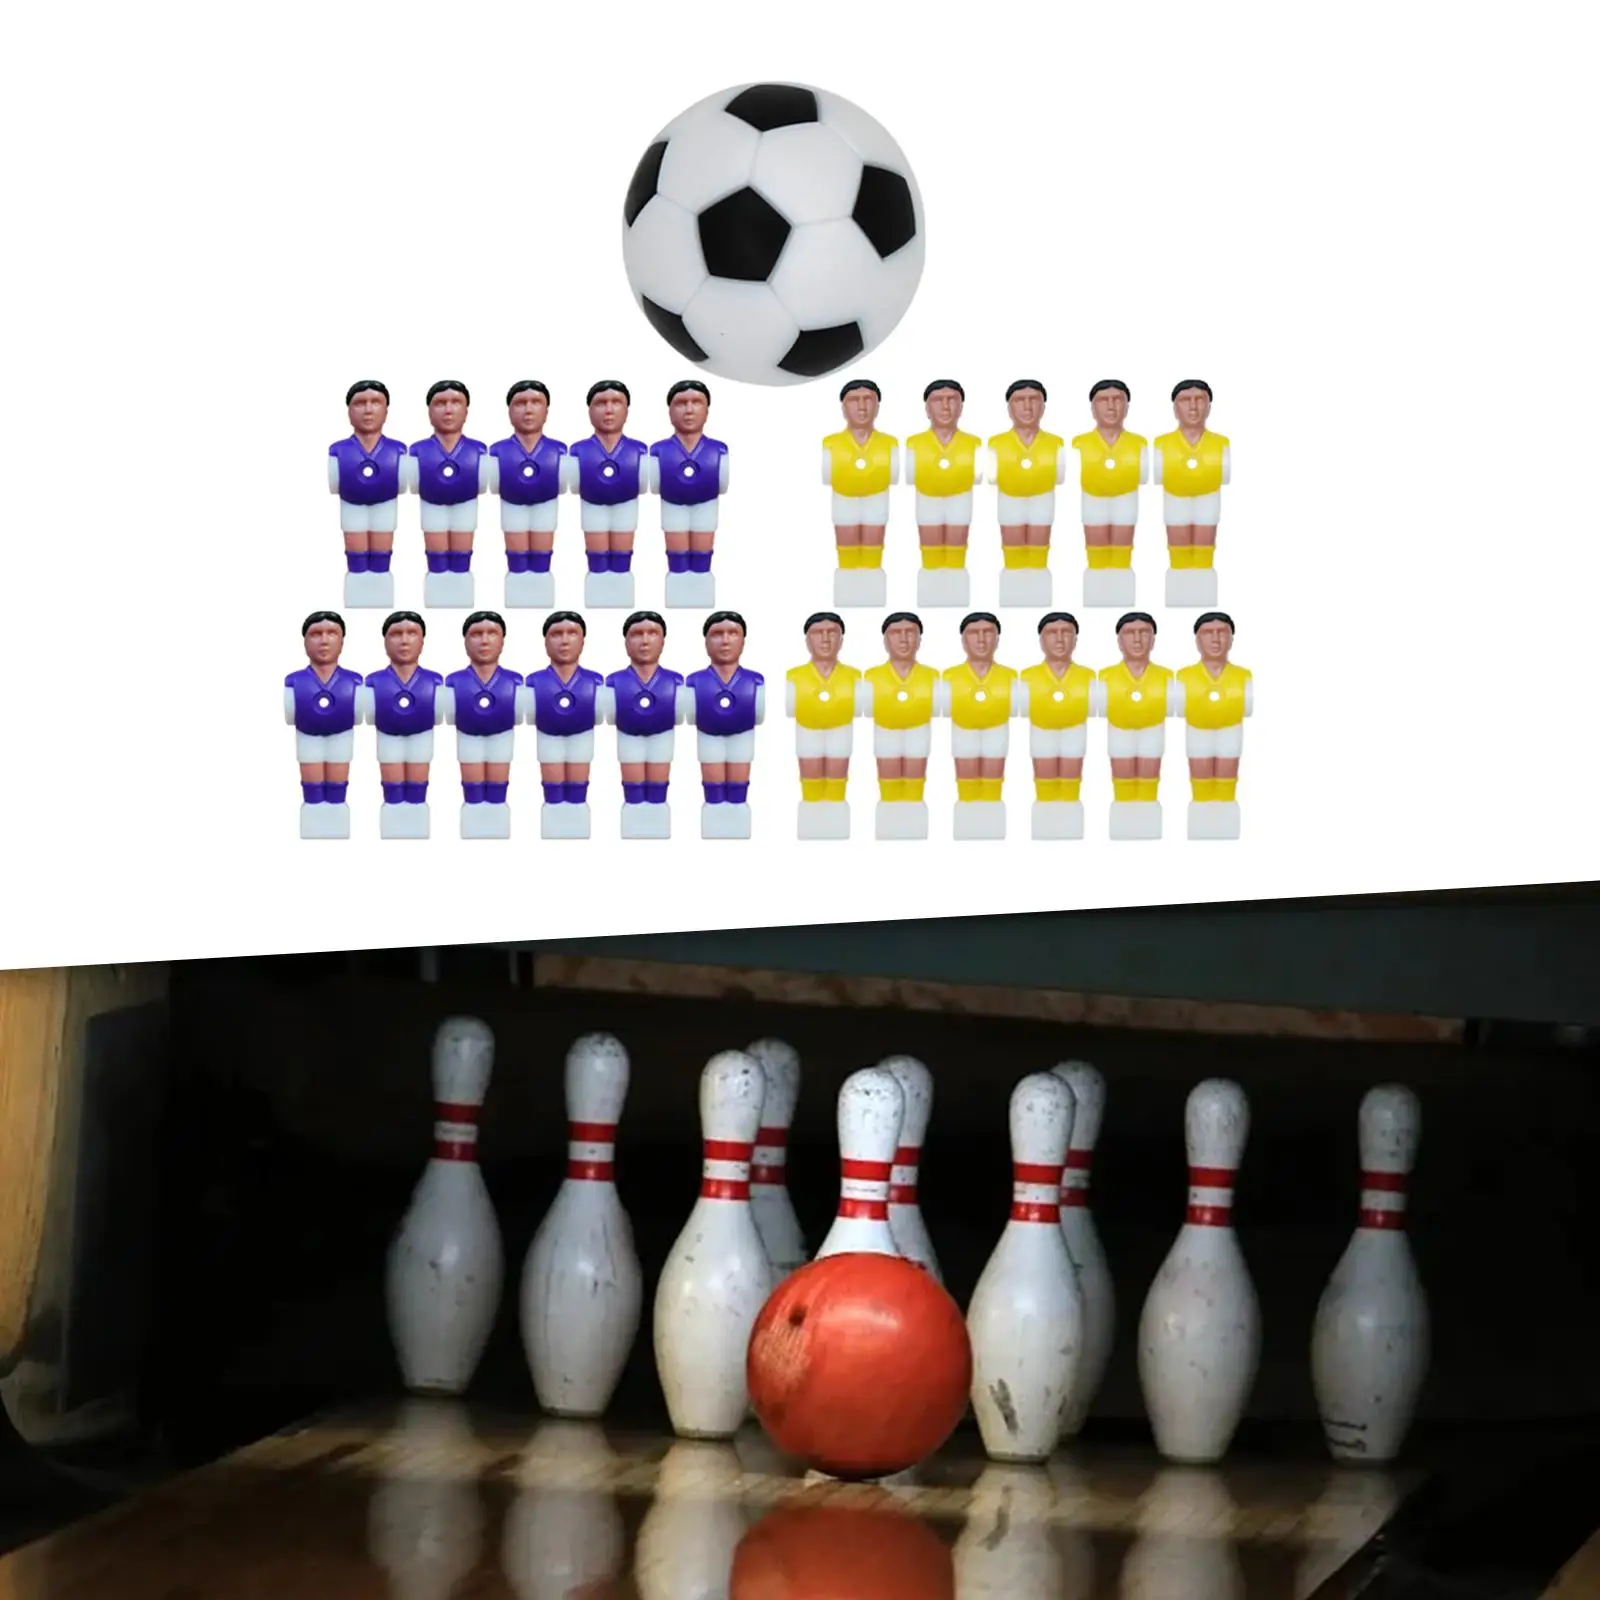 Foosball Men Replacement Football Players Figures Toys Football Player Part